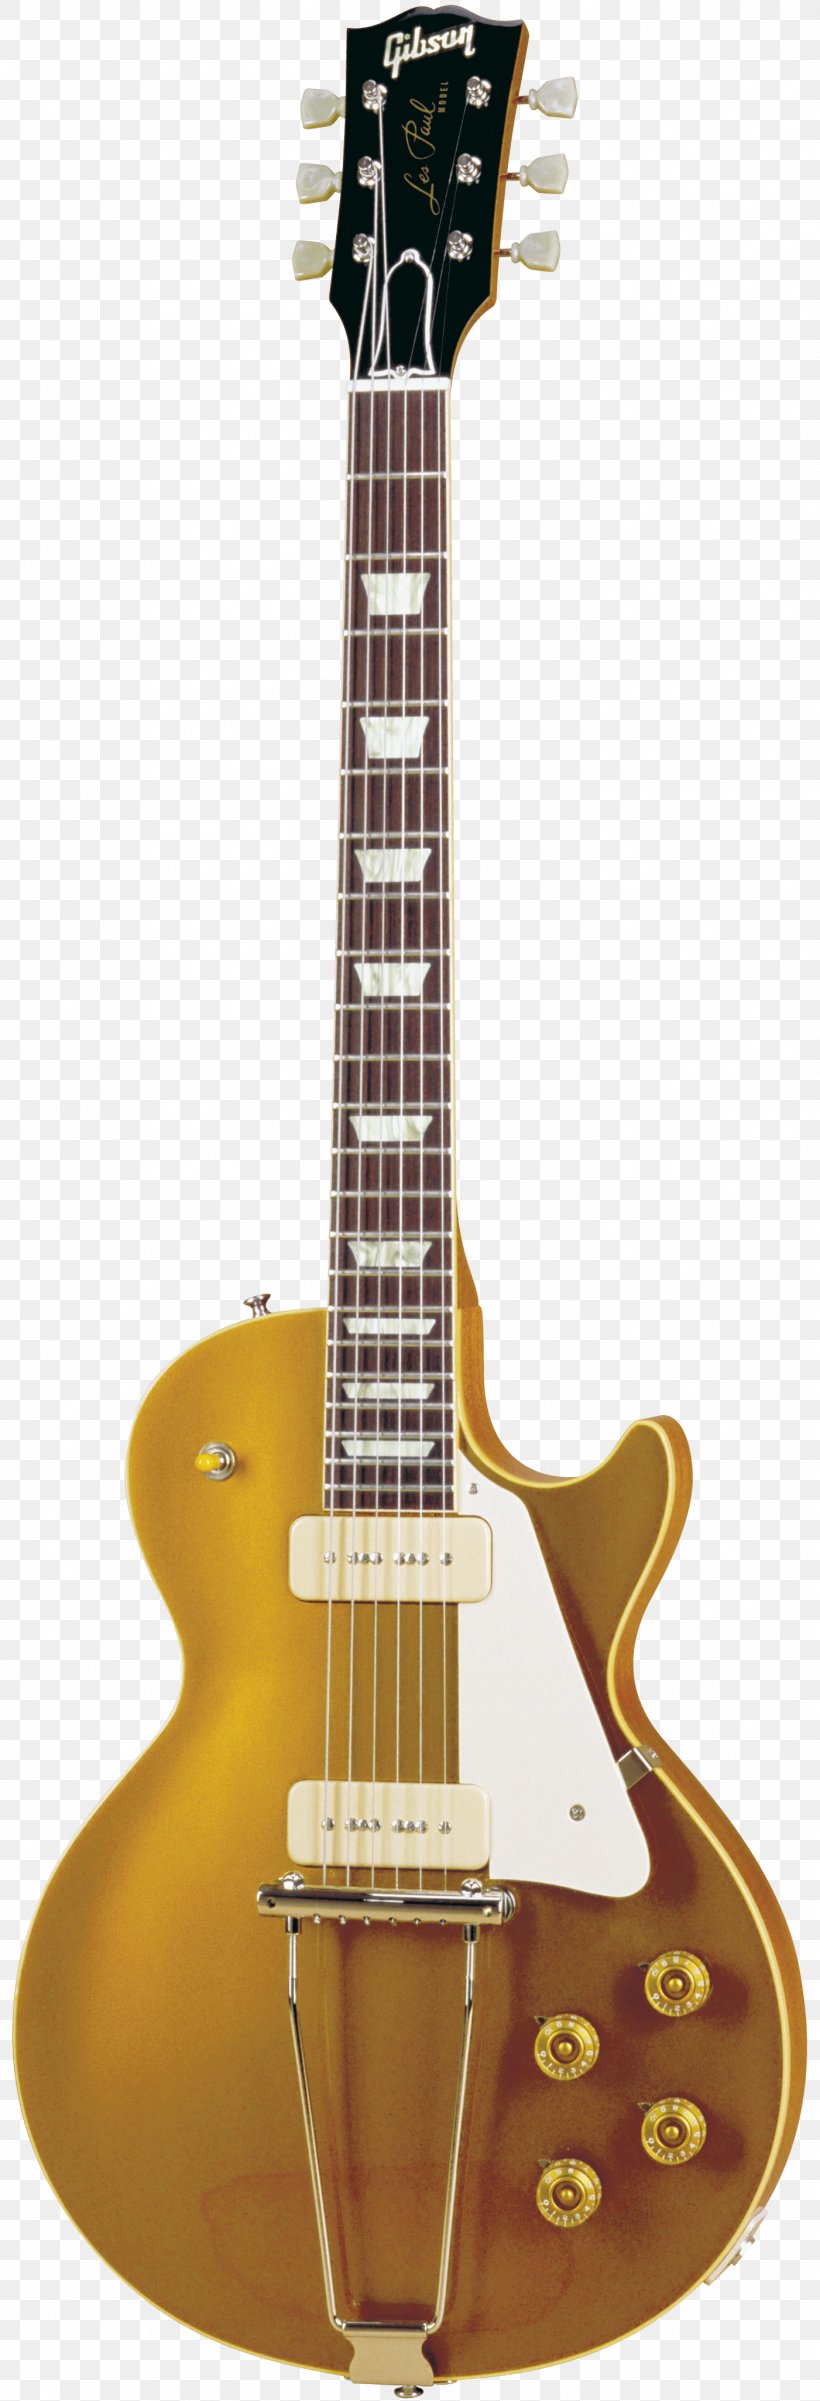 Gibson Les Paul Custom Gibson Les Paul Studio Gibson Les Paul Junior Gibson Les Paul Special, PNG, 1401x4103px, Gibson Les Paul, Acoustic Electric Guitar, Acoustic Guitar, Electric Guitar, Electronic Musical Instrument Download Free